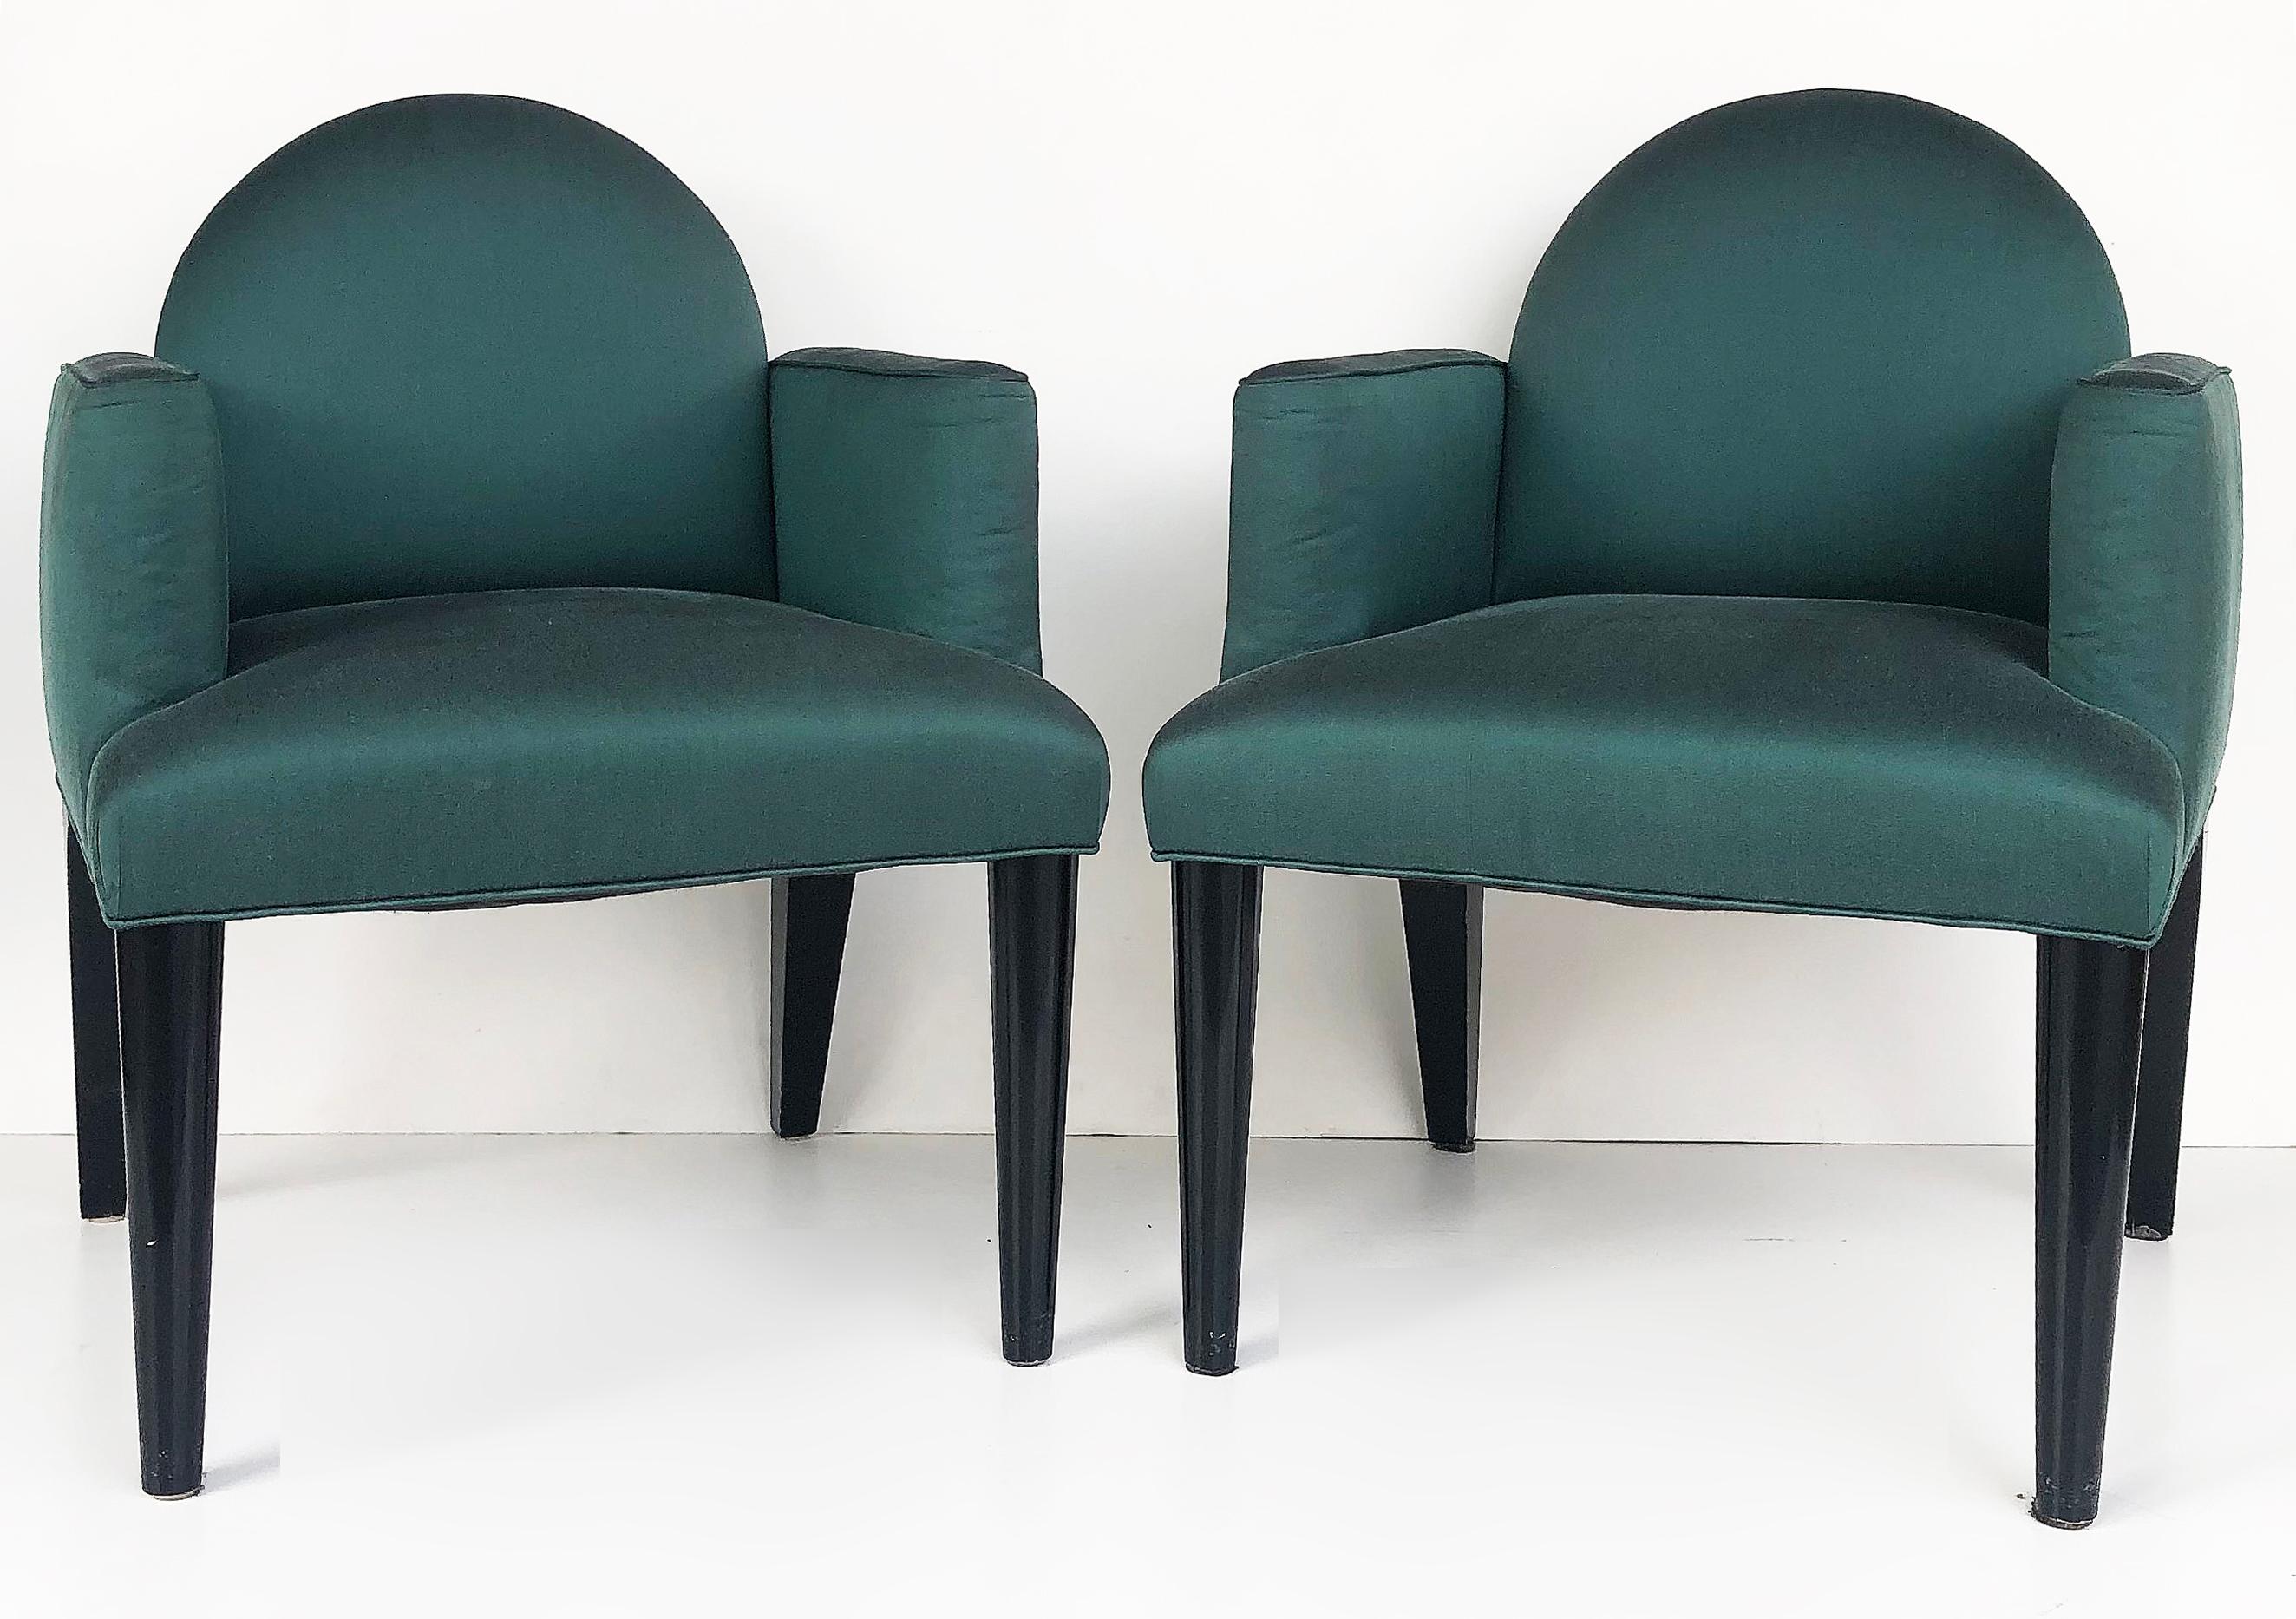 Upholsteredclub chairs with ebonized wood, Donghia Attributed 

Offered for sale is a pair of upholstered club chairs attributed to Donghia with ebonized frames. The chairs have tapering conical front legs and rounded backs that have a Postmodern